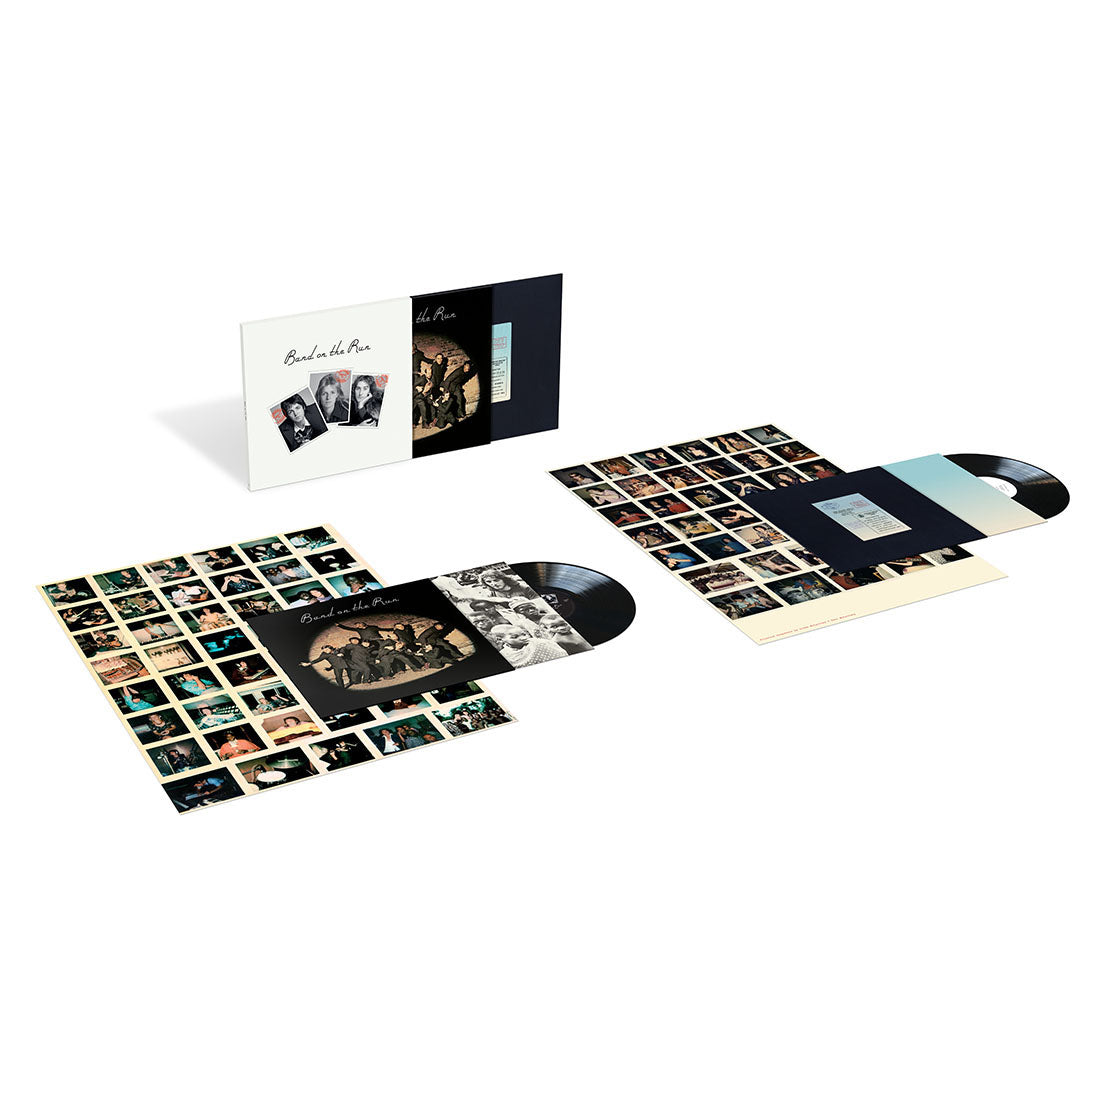 Paul McCartney & Wings - Band On the Run (50th Anniversary Edition): Exclusive Vinyl 2LP